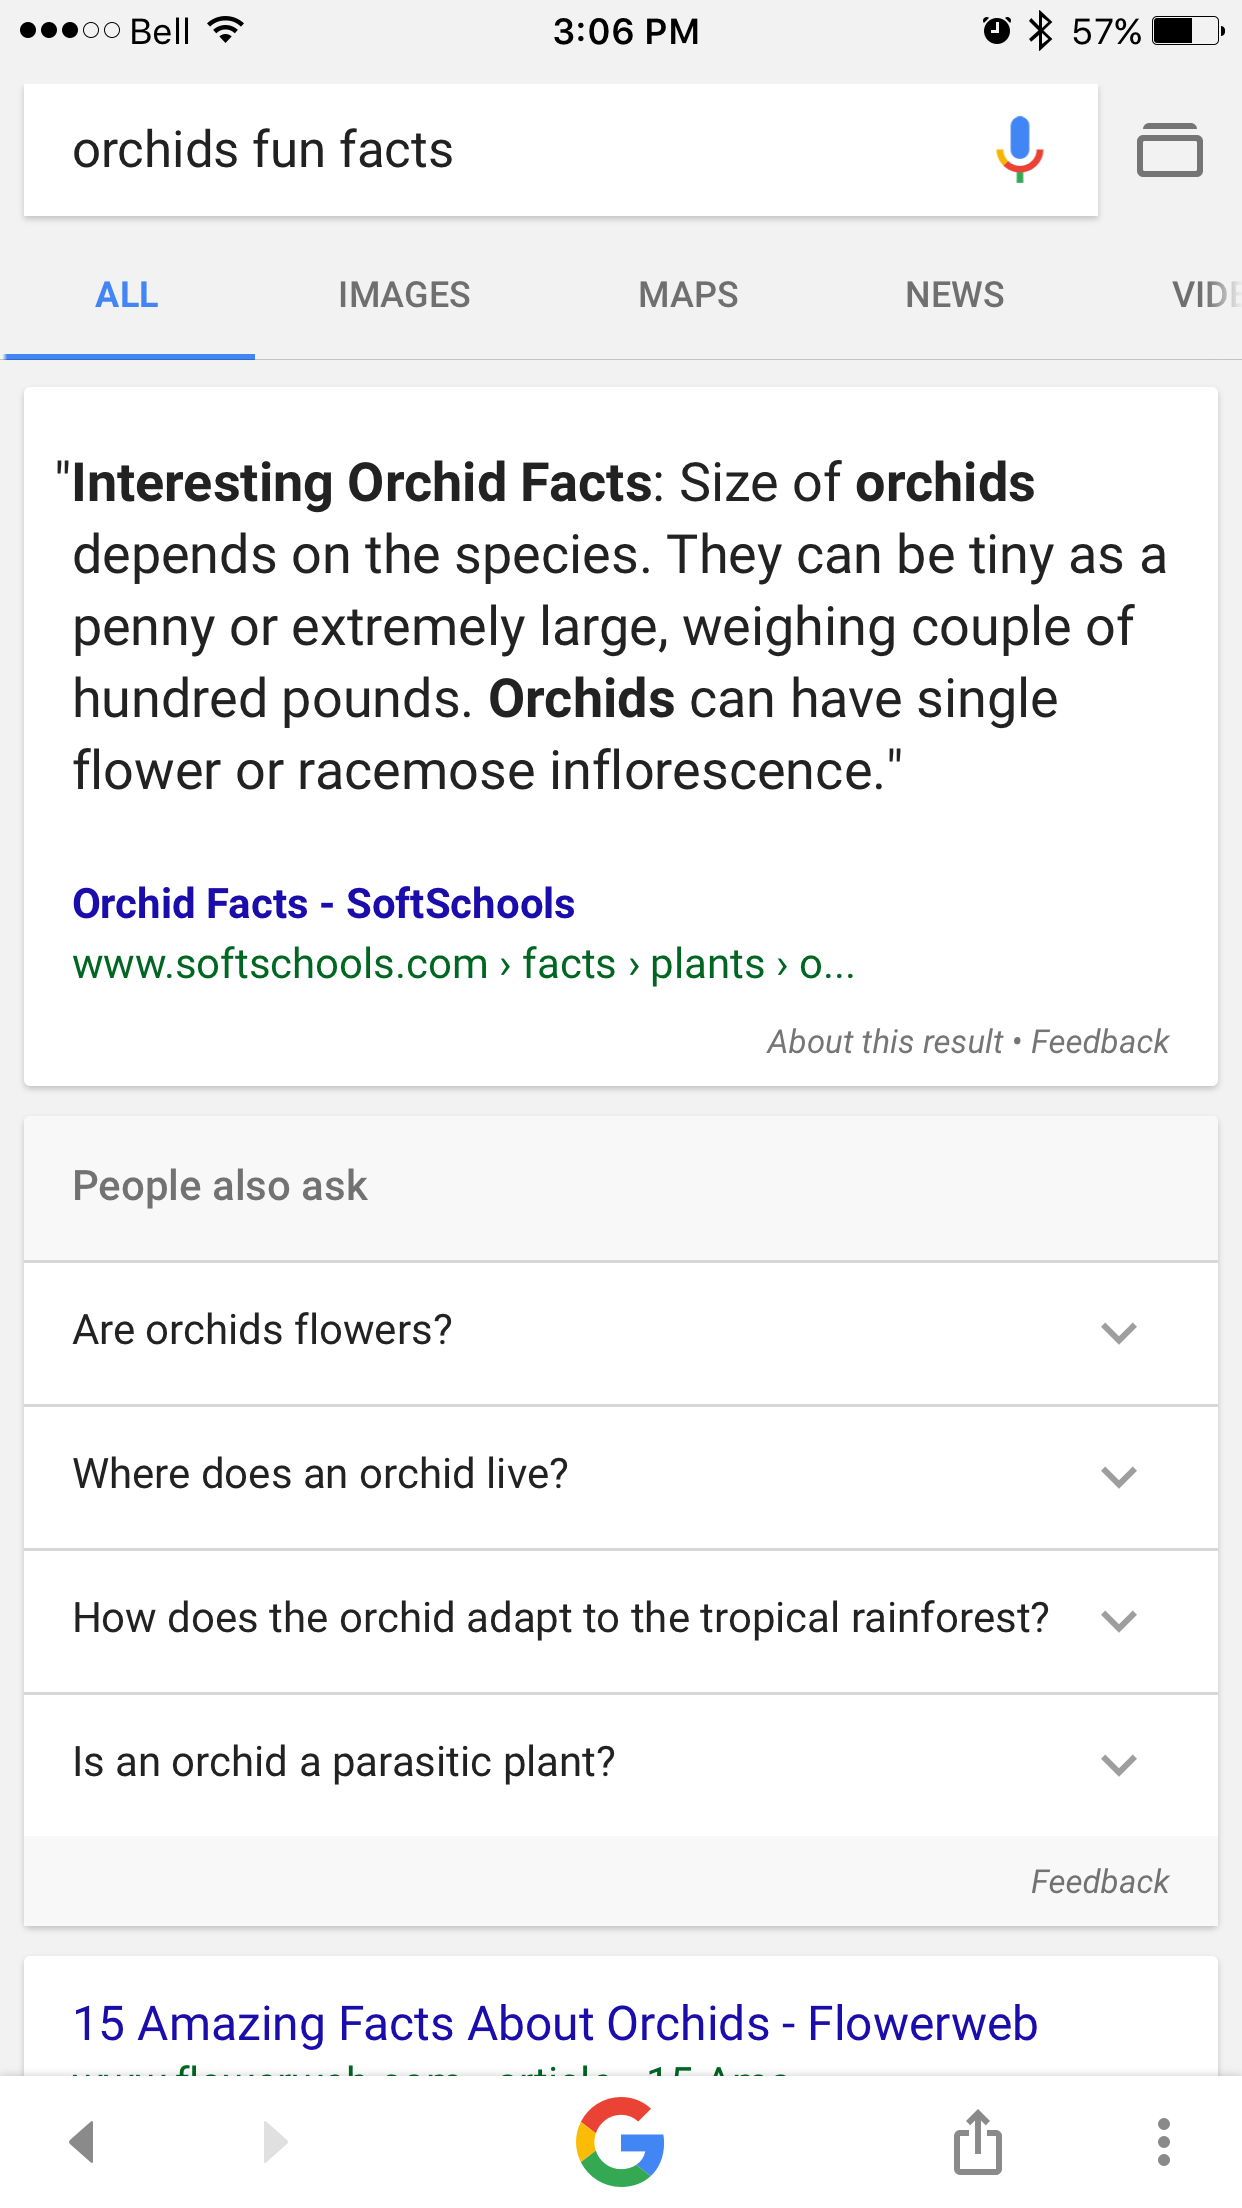 OK Google, Give Me Some Fun Facts About Animals and Nature